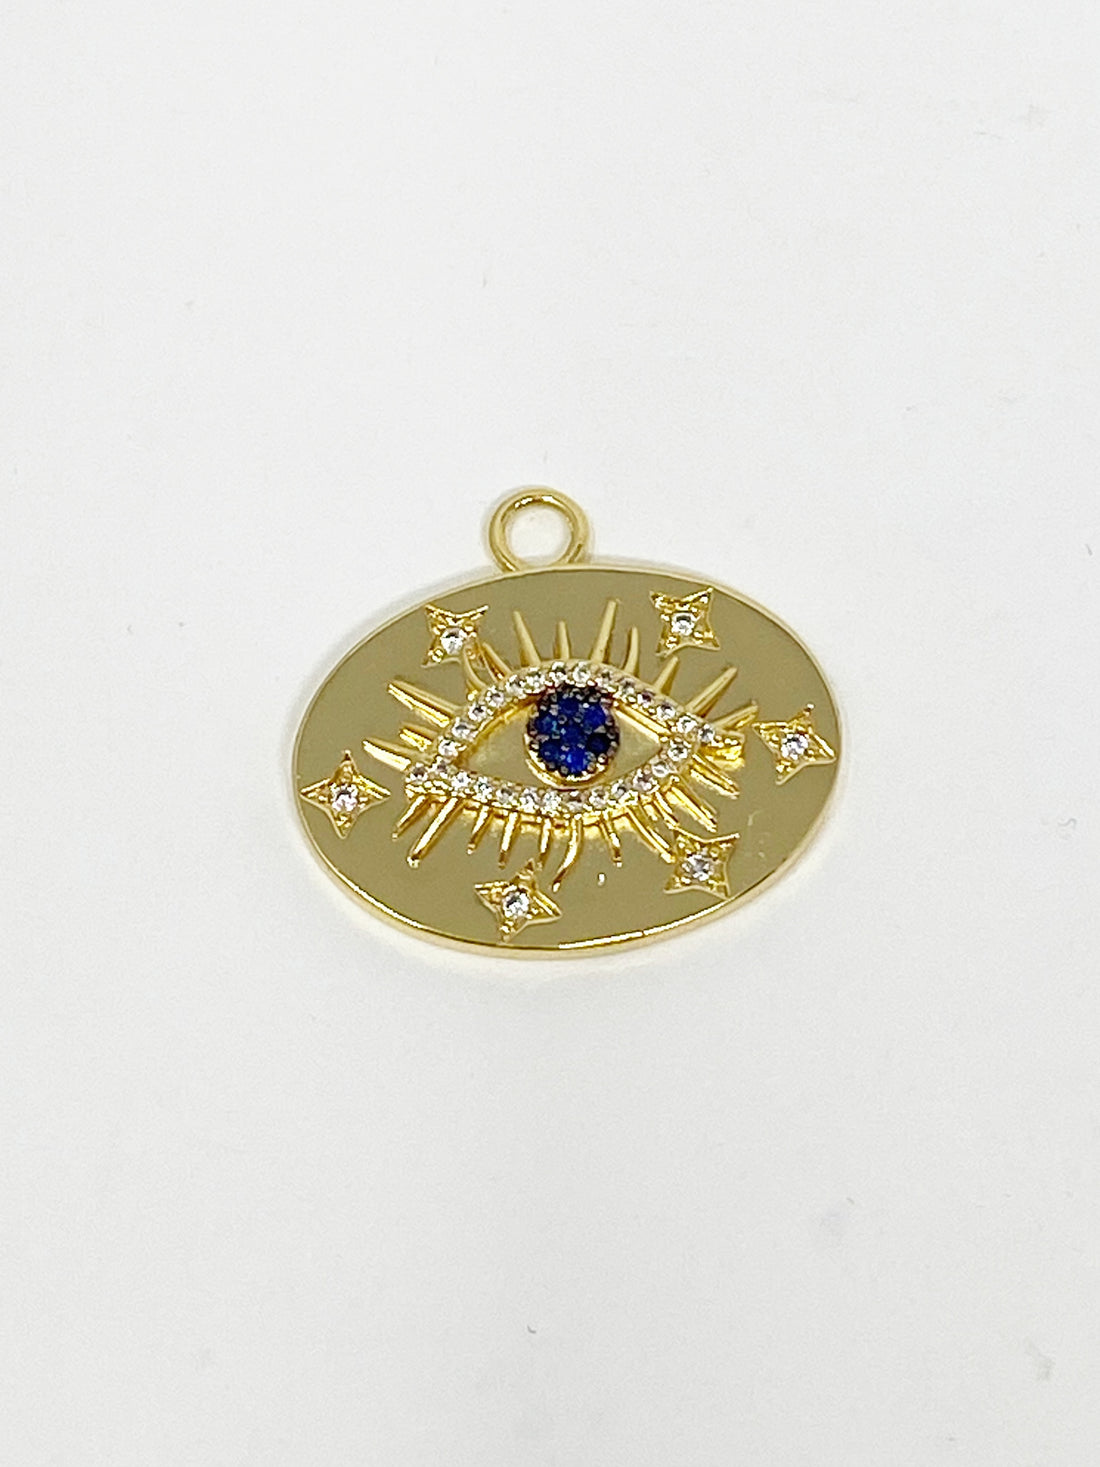 Charming Oval Evil Eye Charm with Sapphire Blue Stones in Gold